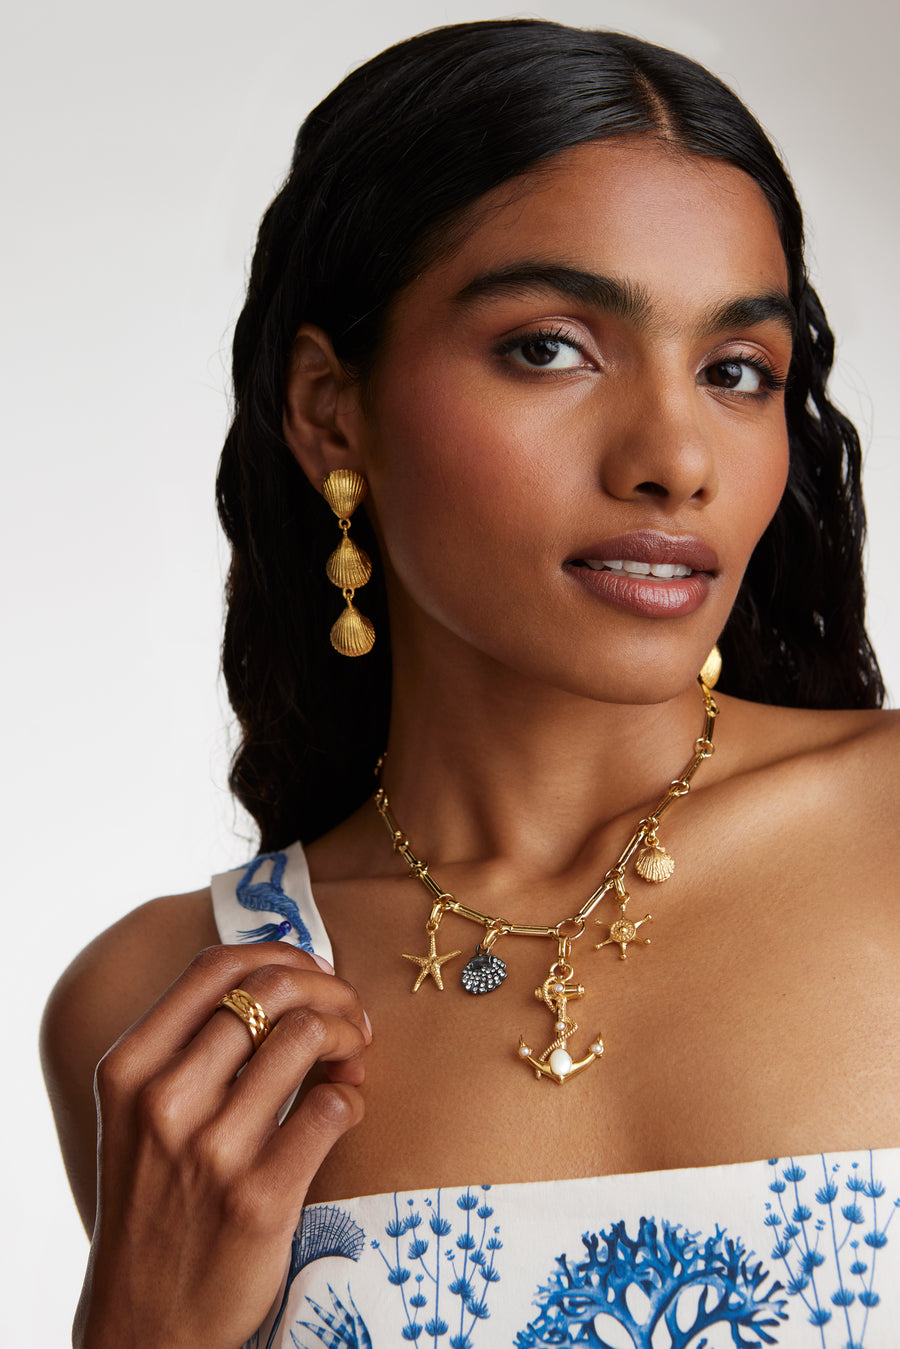 model shot wearing soru jewellery gold ships wheel charm with other nautical charms attached to a charm chain. Model also wearing shell drop earrings and a gold ring